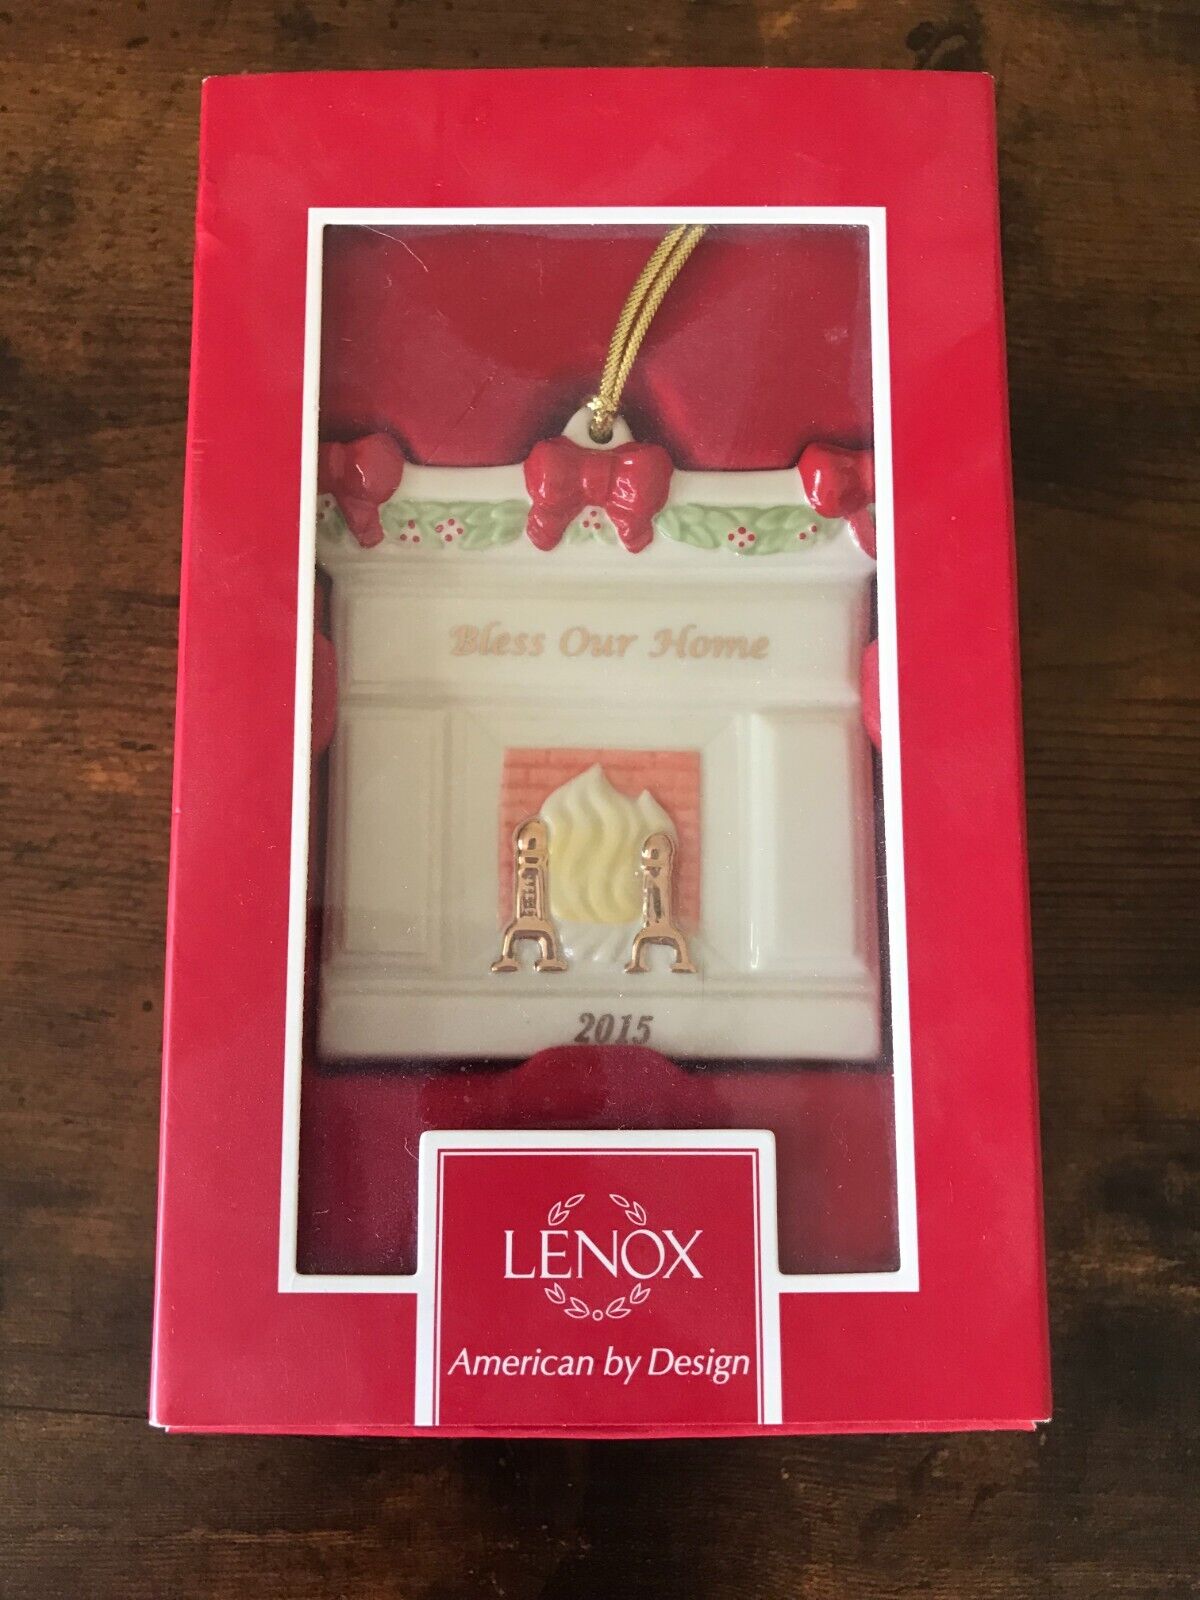 New in Box Lenox American by Design Bless our Home Ornament 2015 Retail PR $60